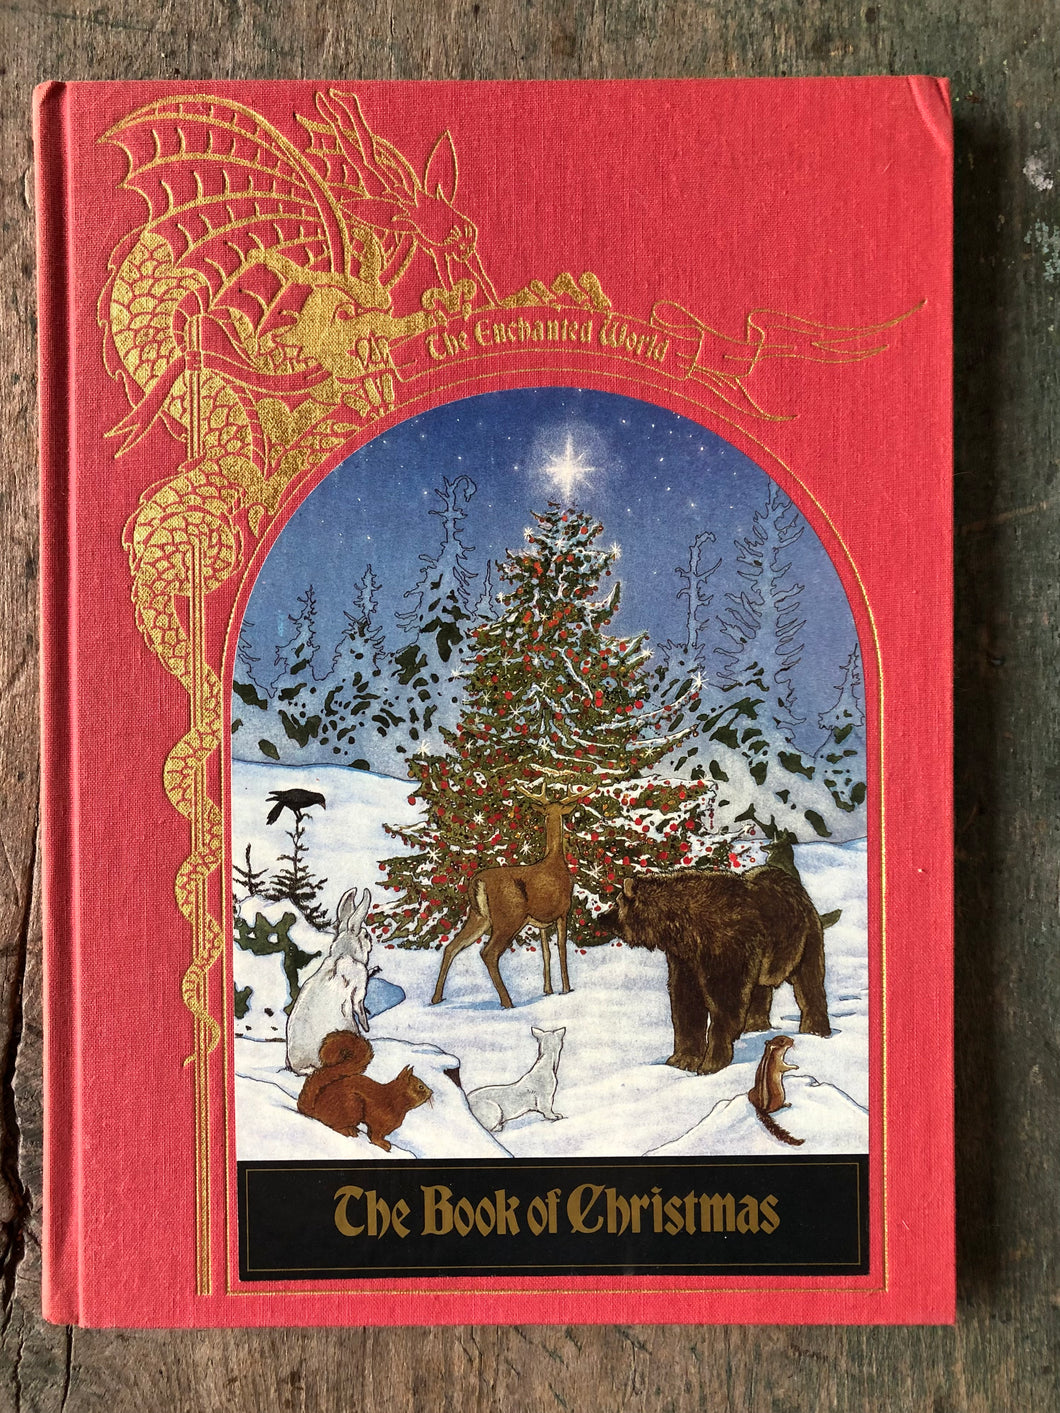 The Enchanted World: The Book of Christmas by Brendan Lehane and the Editors of Time-Life Books